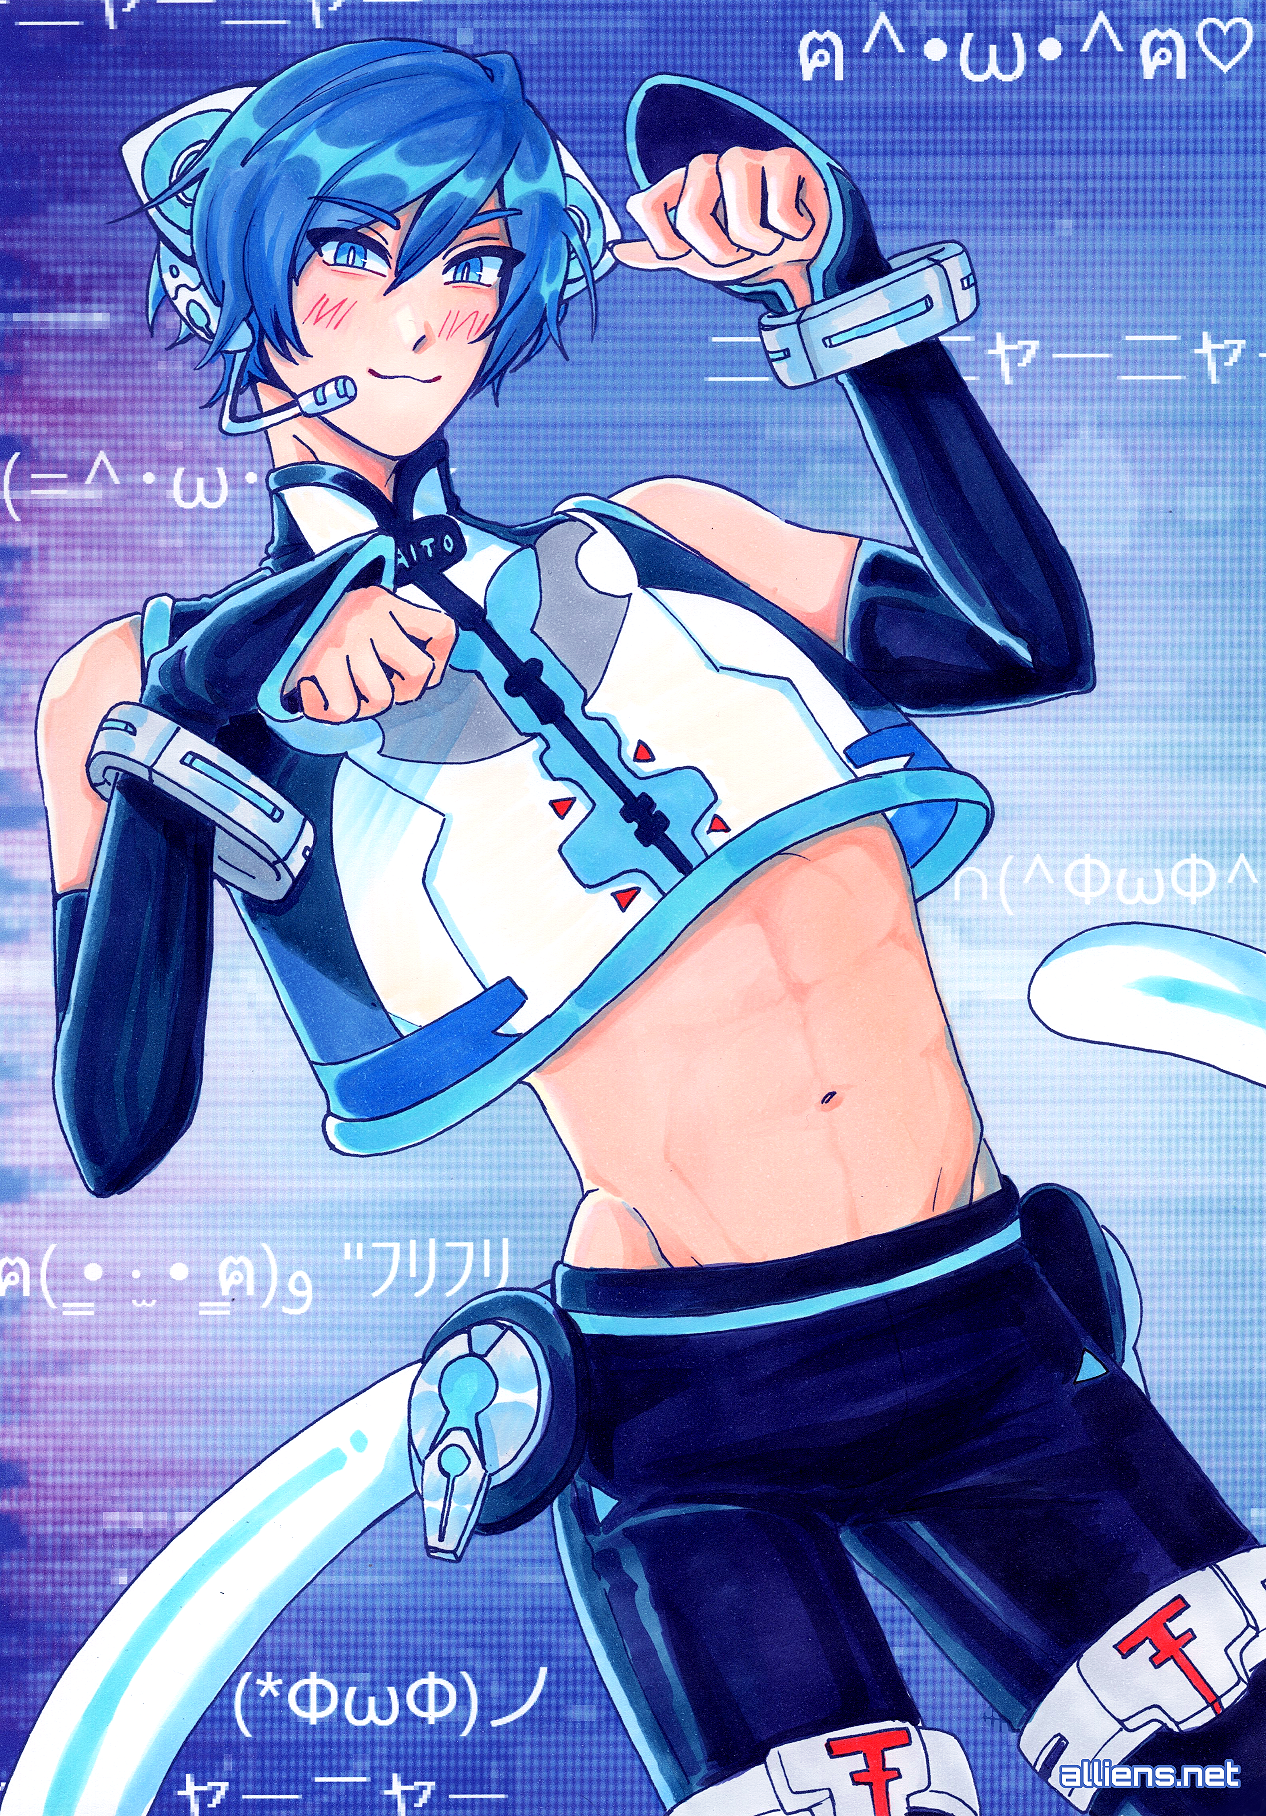 cyber cat kaito, copics and digital background, A4